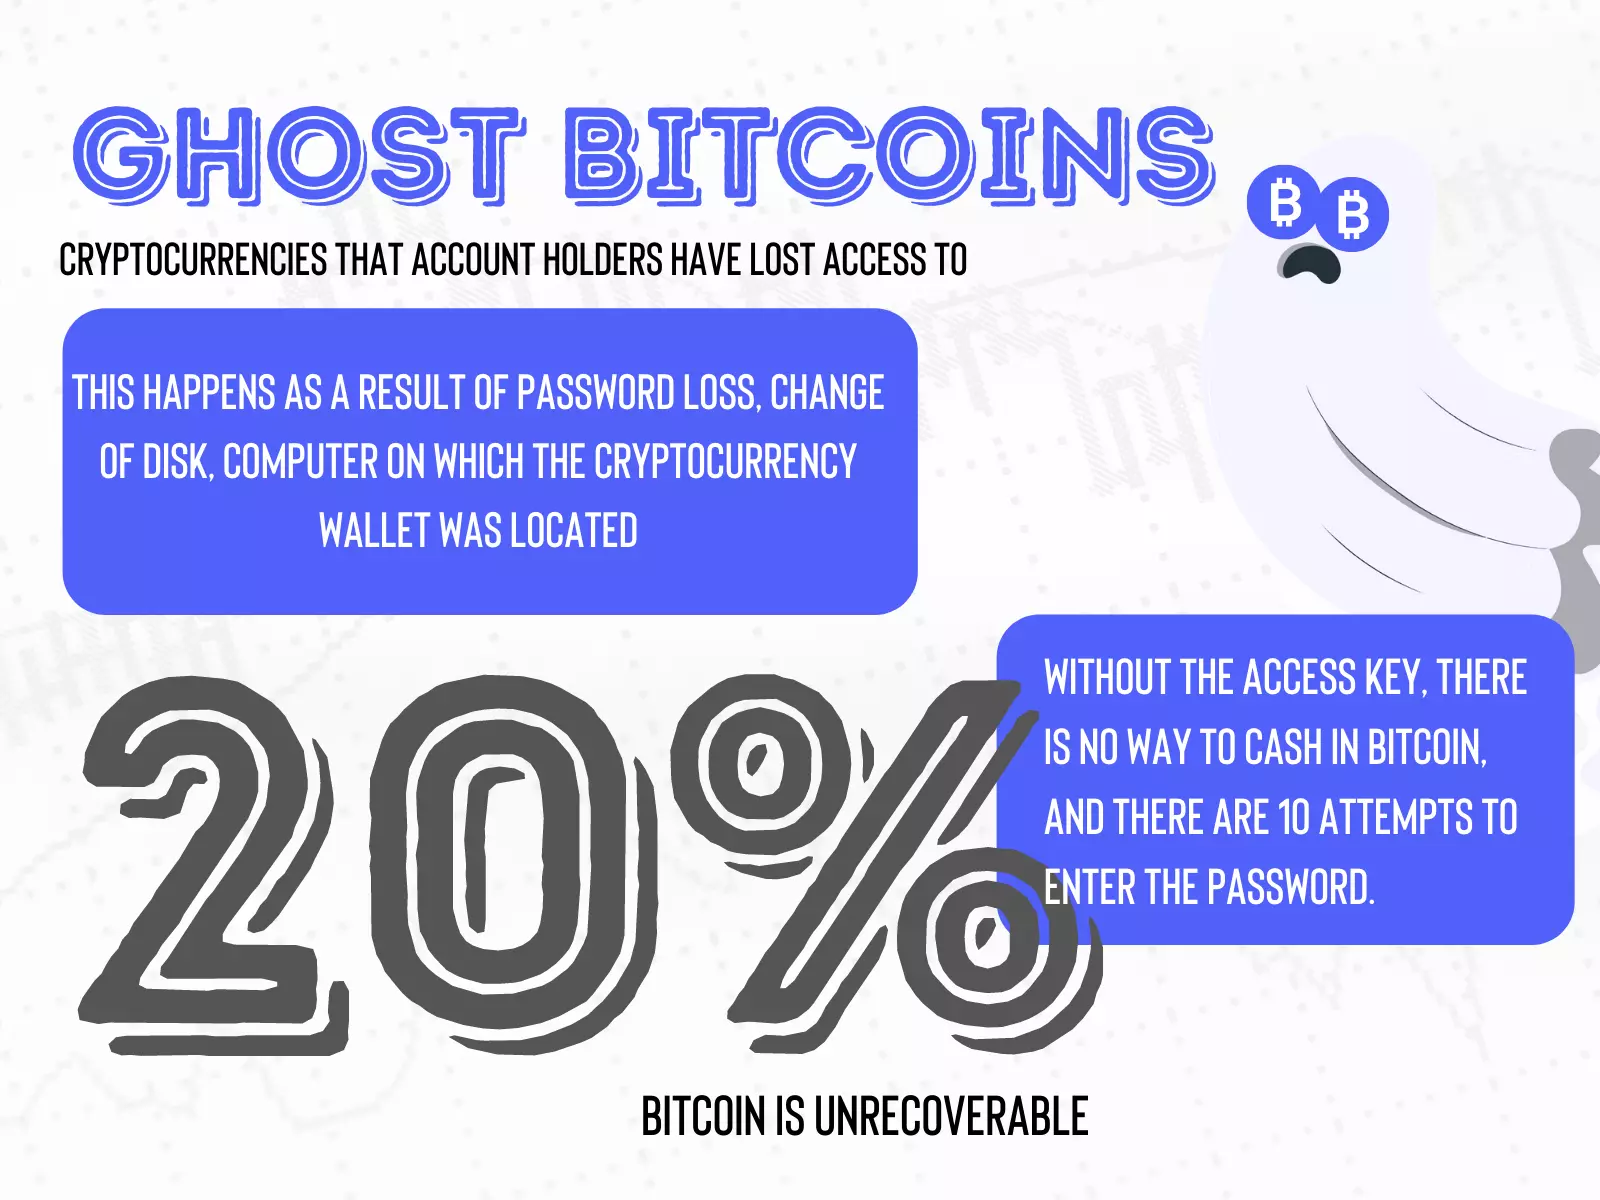 What are ghost bitcoins? These are bitcoin whose owners have lost access - forever.